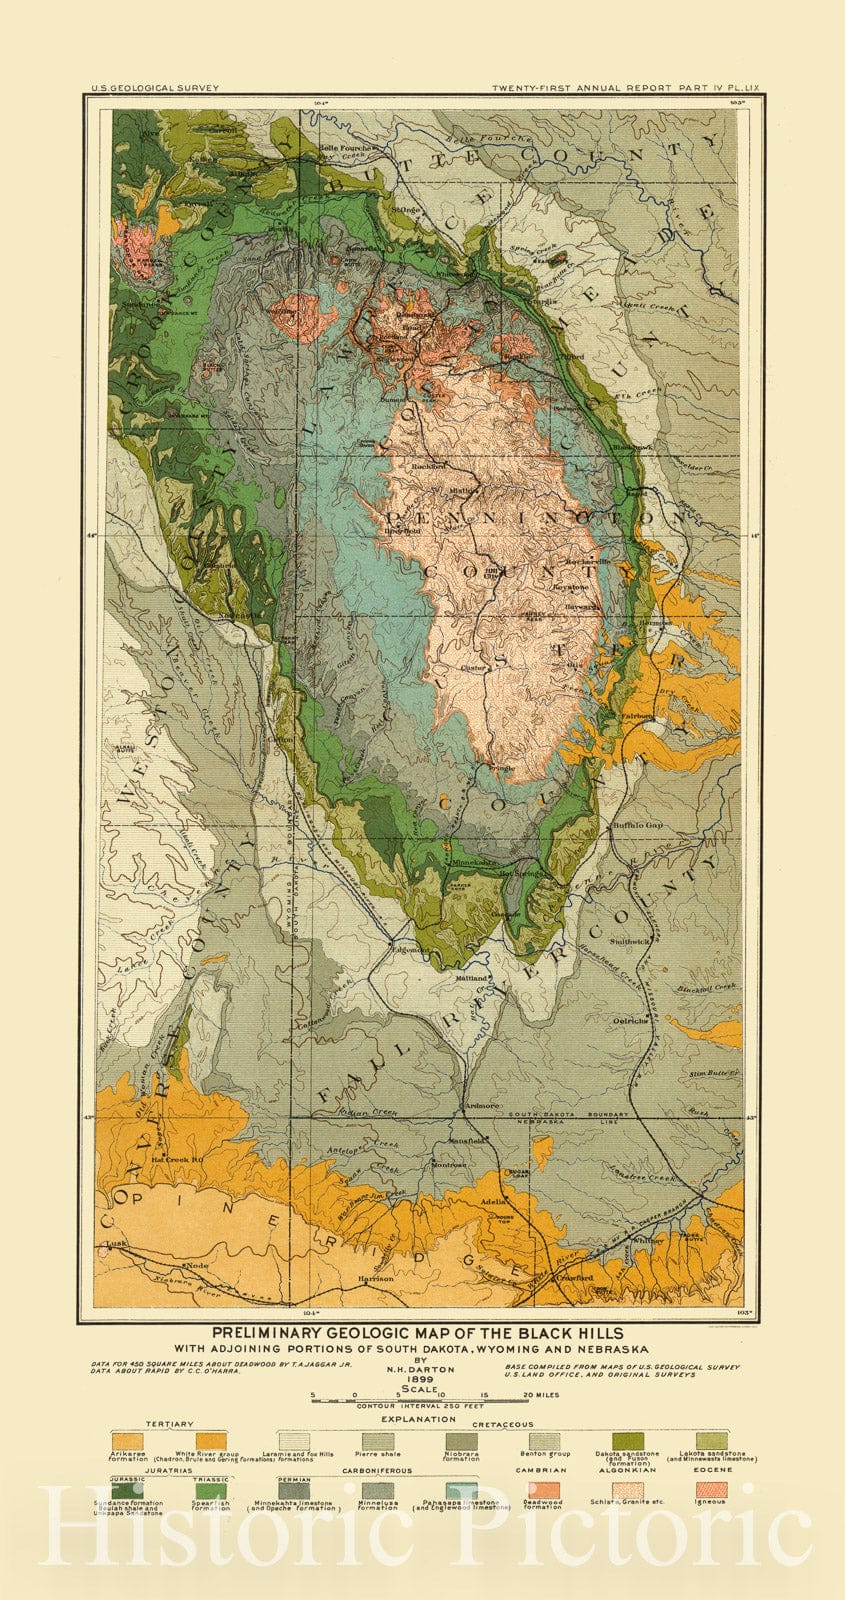 Map : Black Hills, South Dakota and Wyoming 1899, Preliminary geologic map of the Black Hills : with adjoining portions of South Dakota, Wyoming, and Nebraska